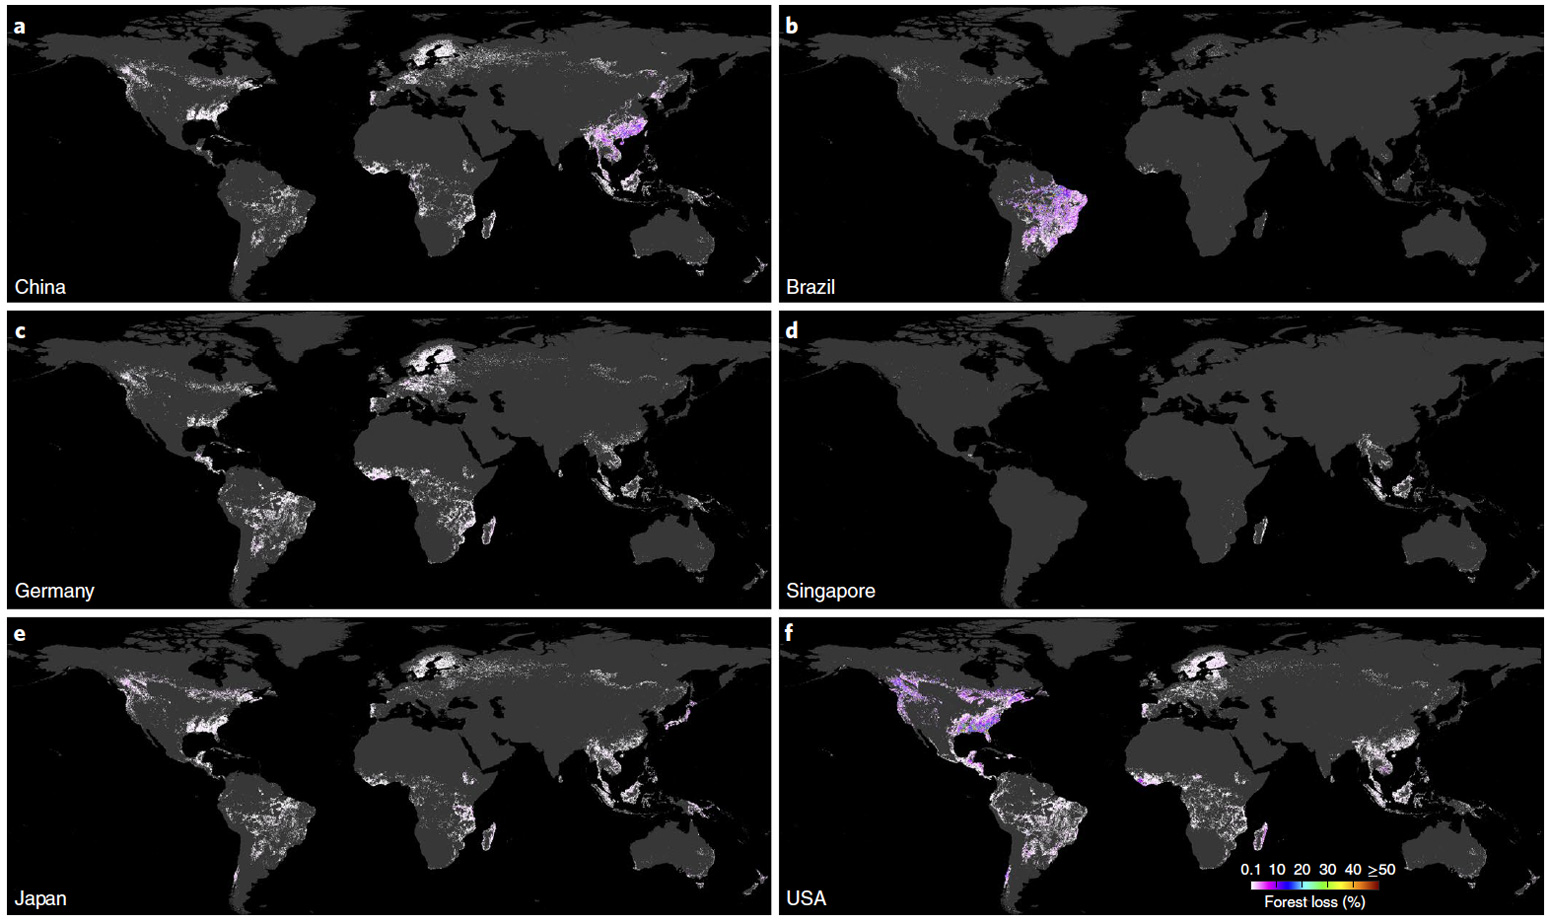 Cumulative deforestation footprints from China, Brazil, Germany, Singapore, Japan and the US